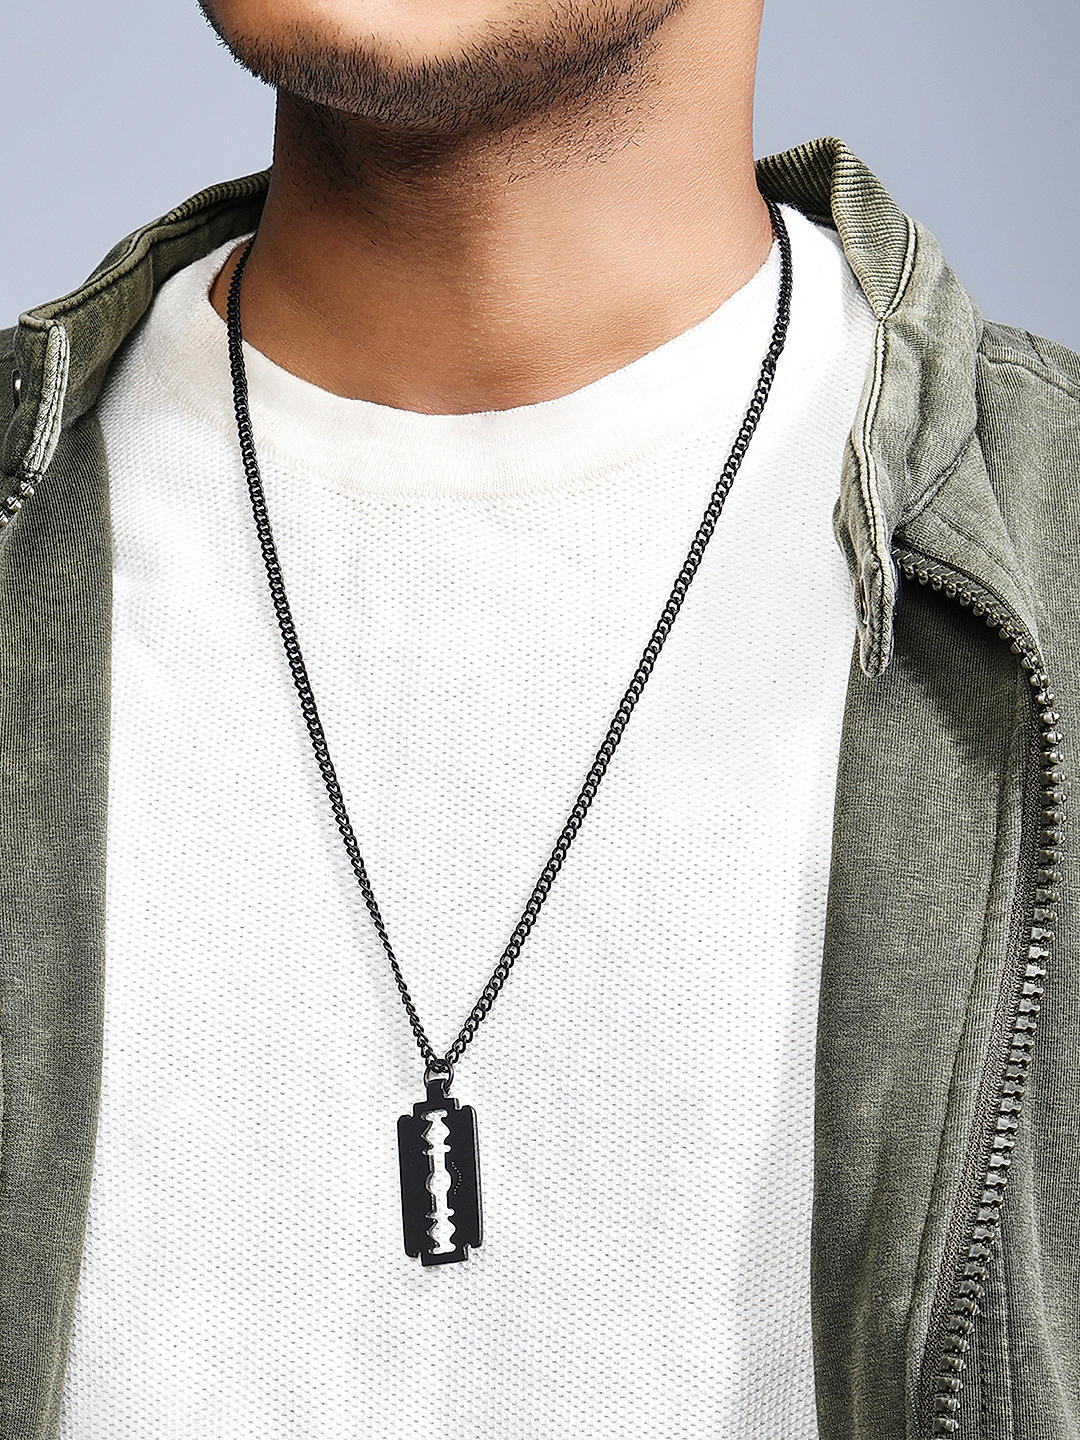 Buy GalisGalis Choker Necklace - Black Necklace with Stainless Steel Bead  Pendant - Handmade Choker Necklace For Men, Our Mens Necklace with Pendants  are Stylish Gifts For Him - 17.7